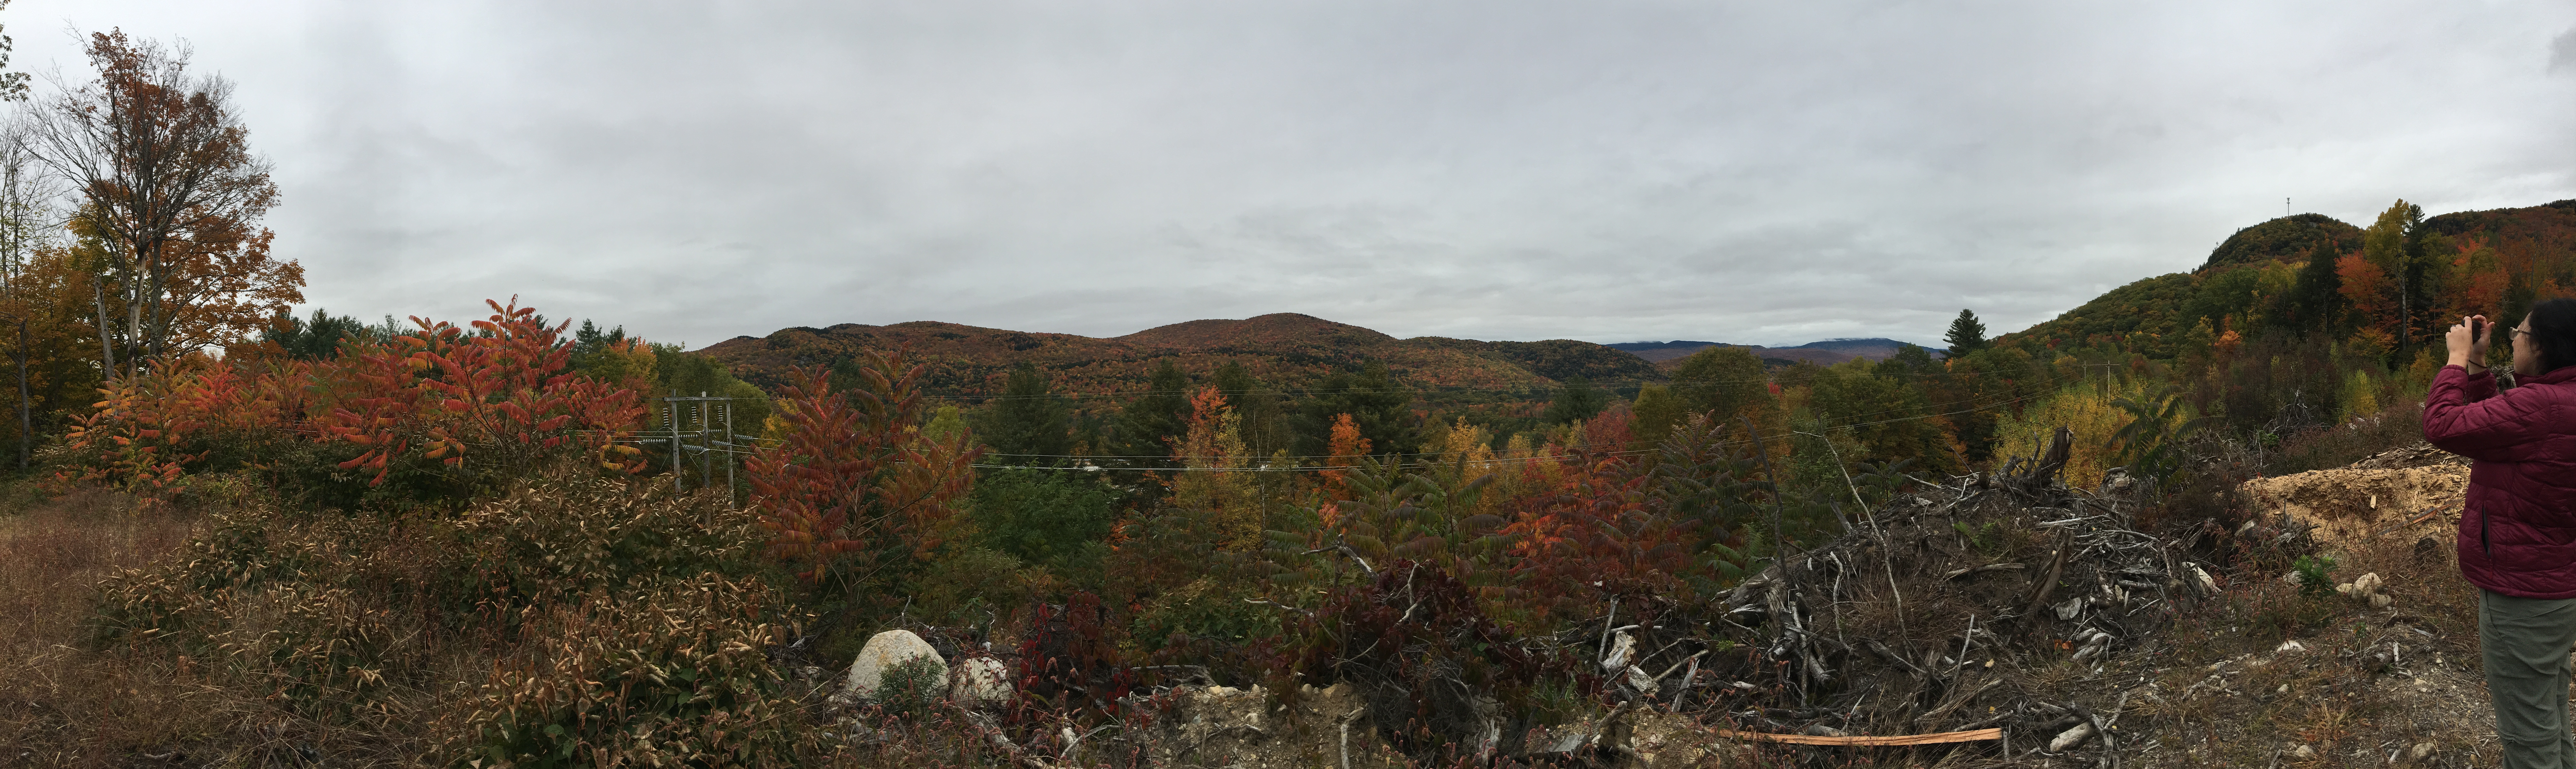 A panorama of the view into a valley from a high point. Lots of different hills are visible, covered in different colors of trees. The sky is cloudy.